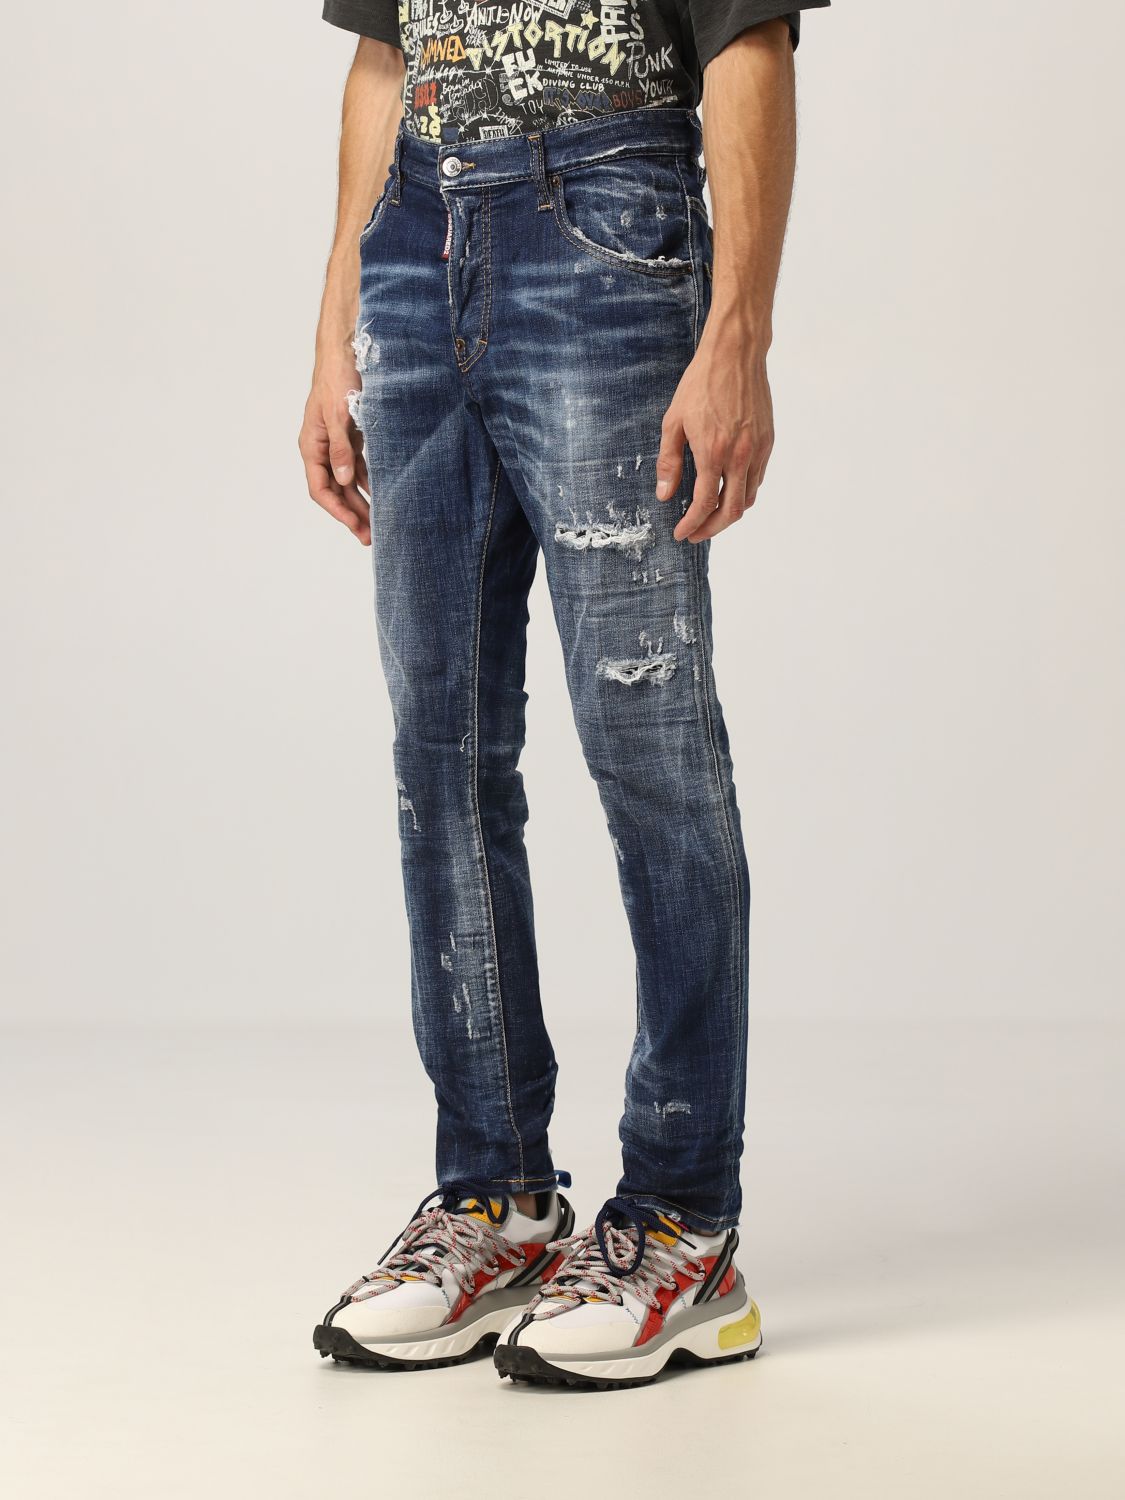 DSQUARED2: 1964 skater jeans with rips - Denim | Dsquared2 jeans ...